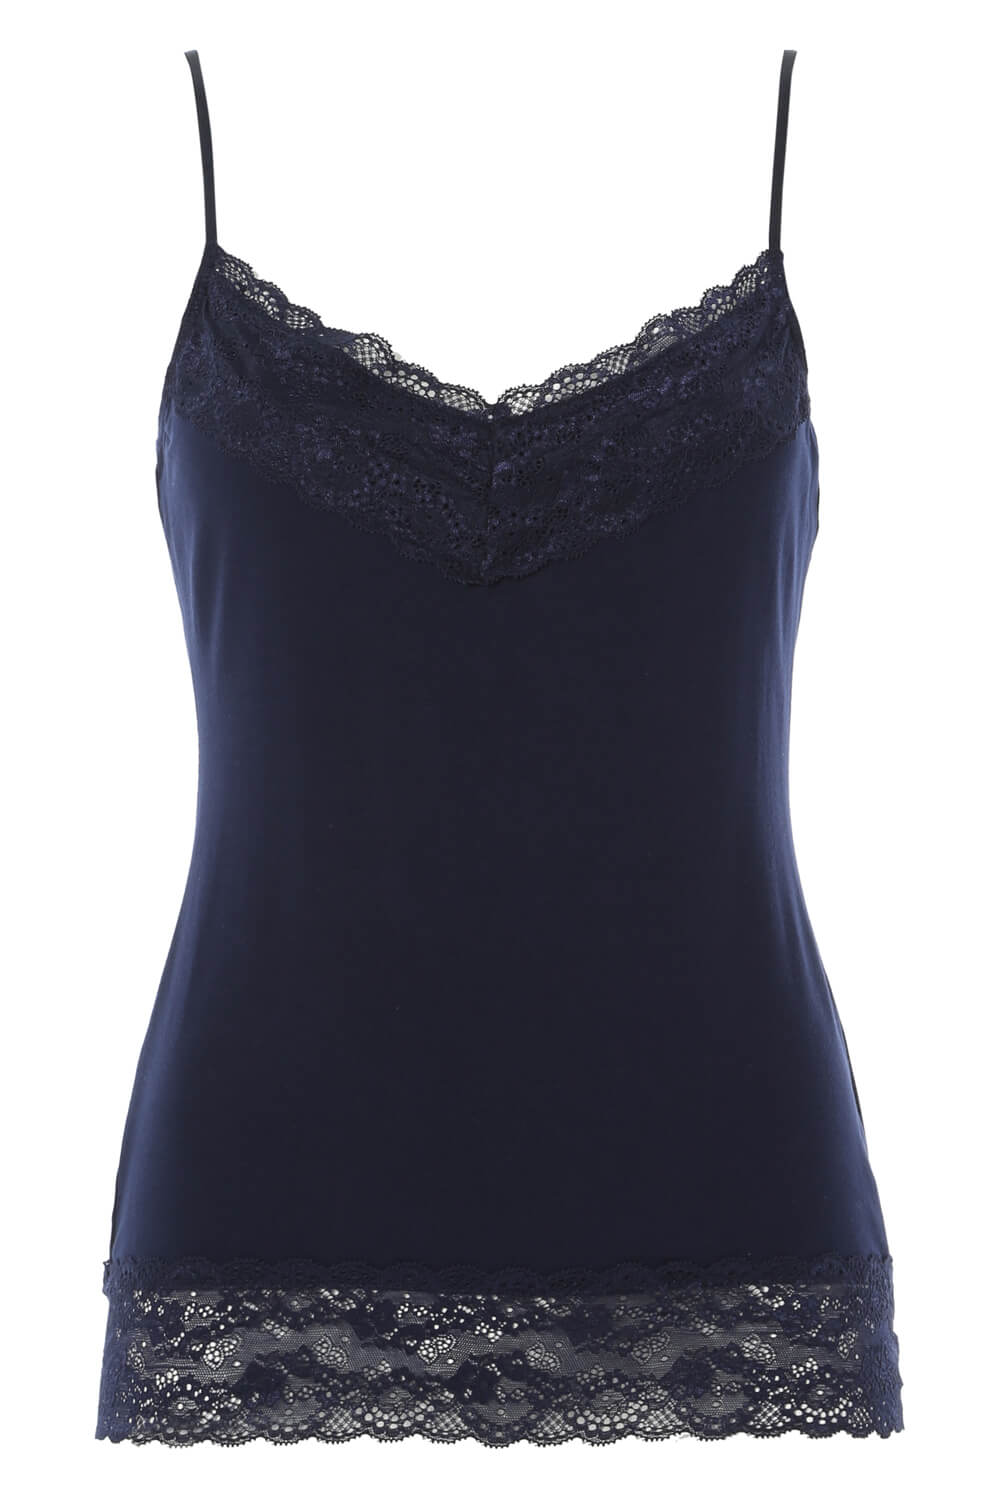 Navy  Lace Trim Camisole Top, Image 5 of 5